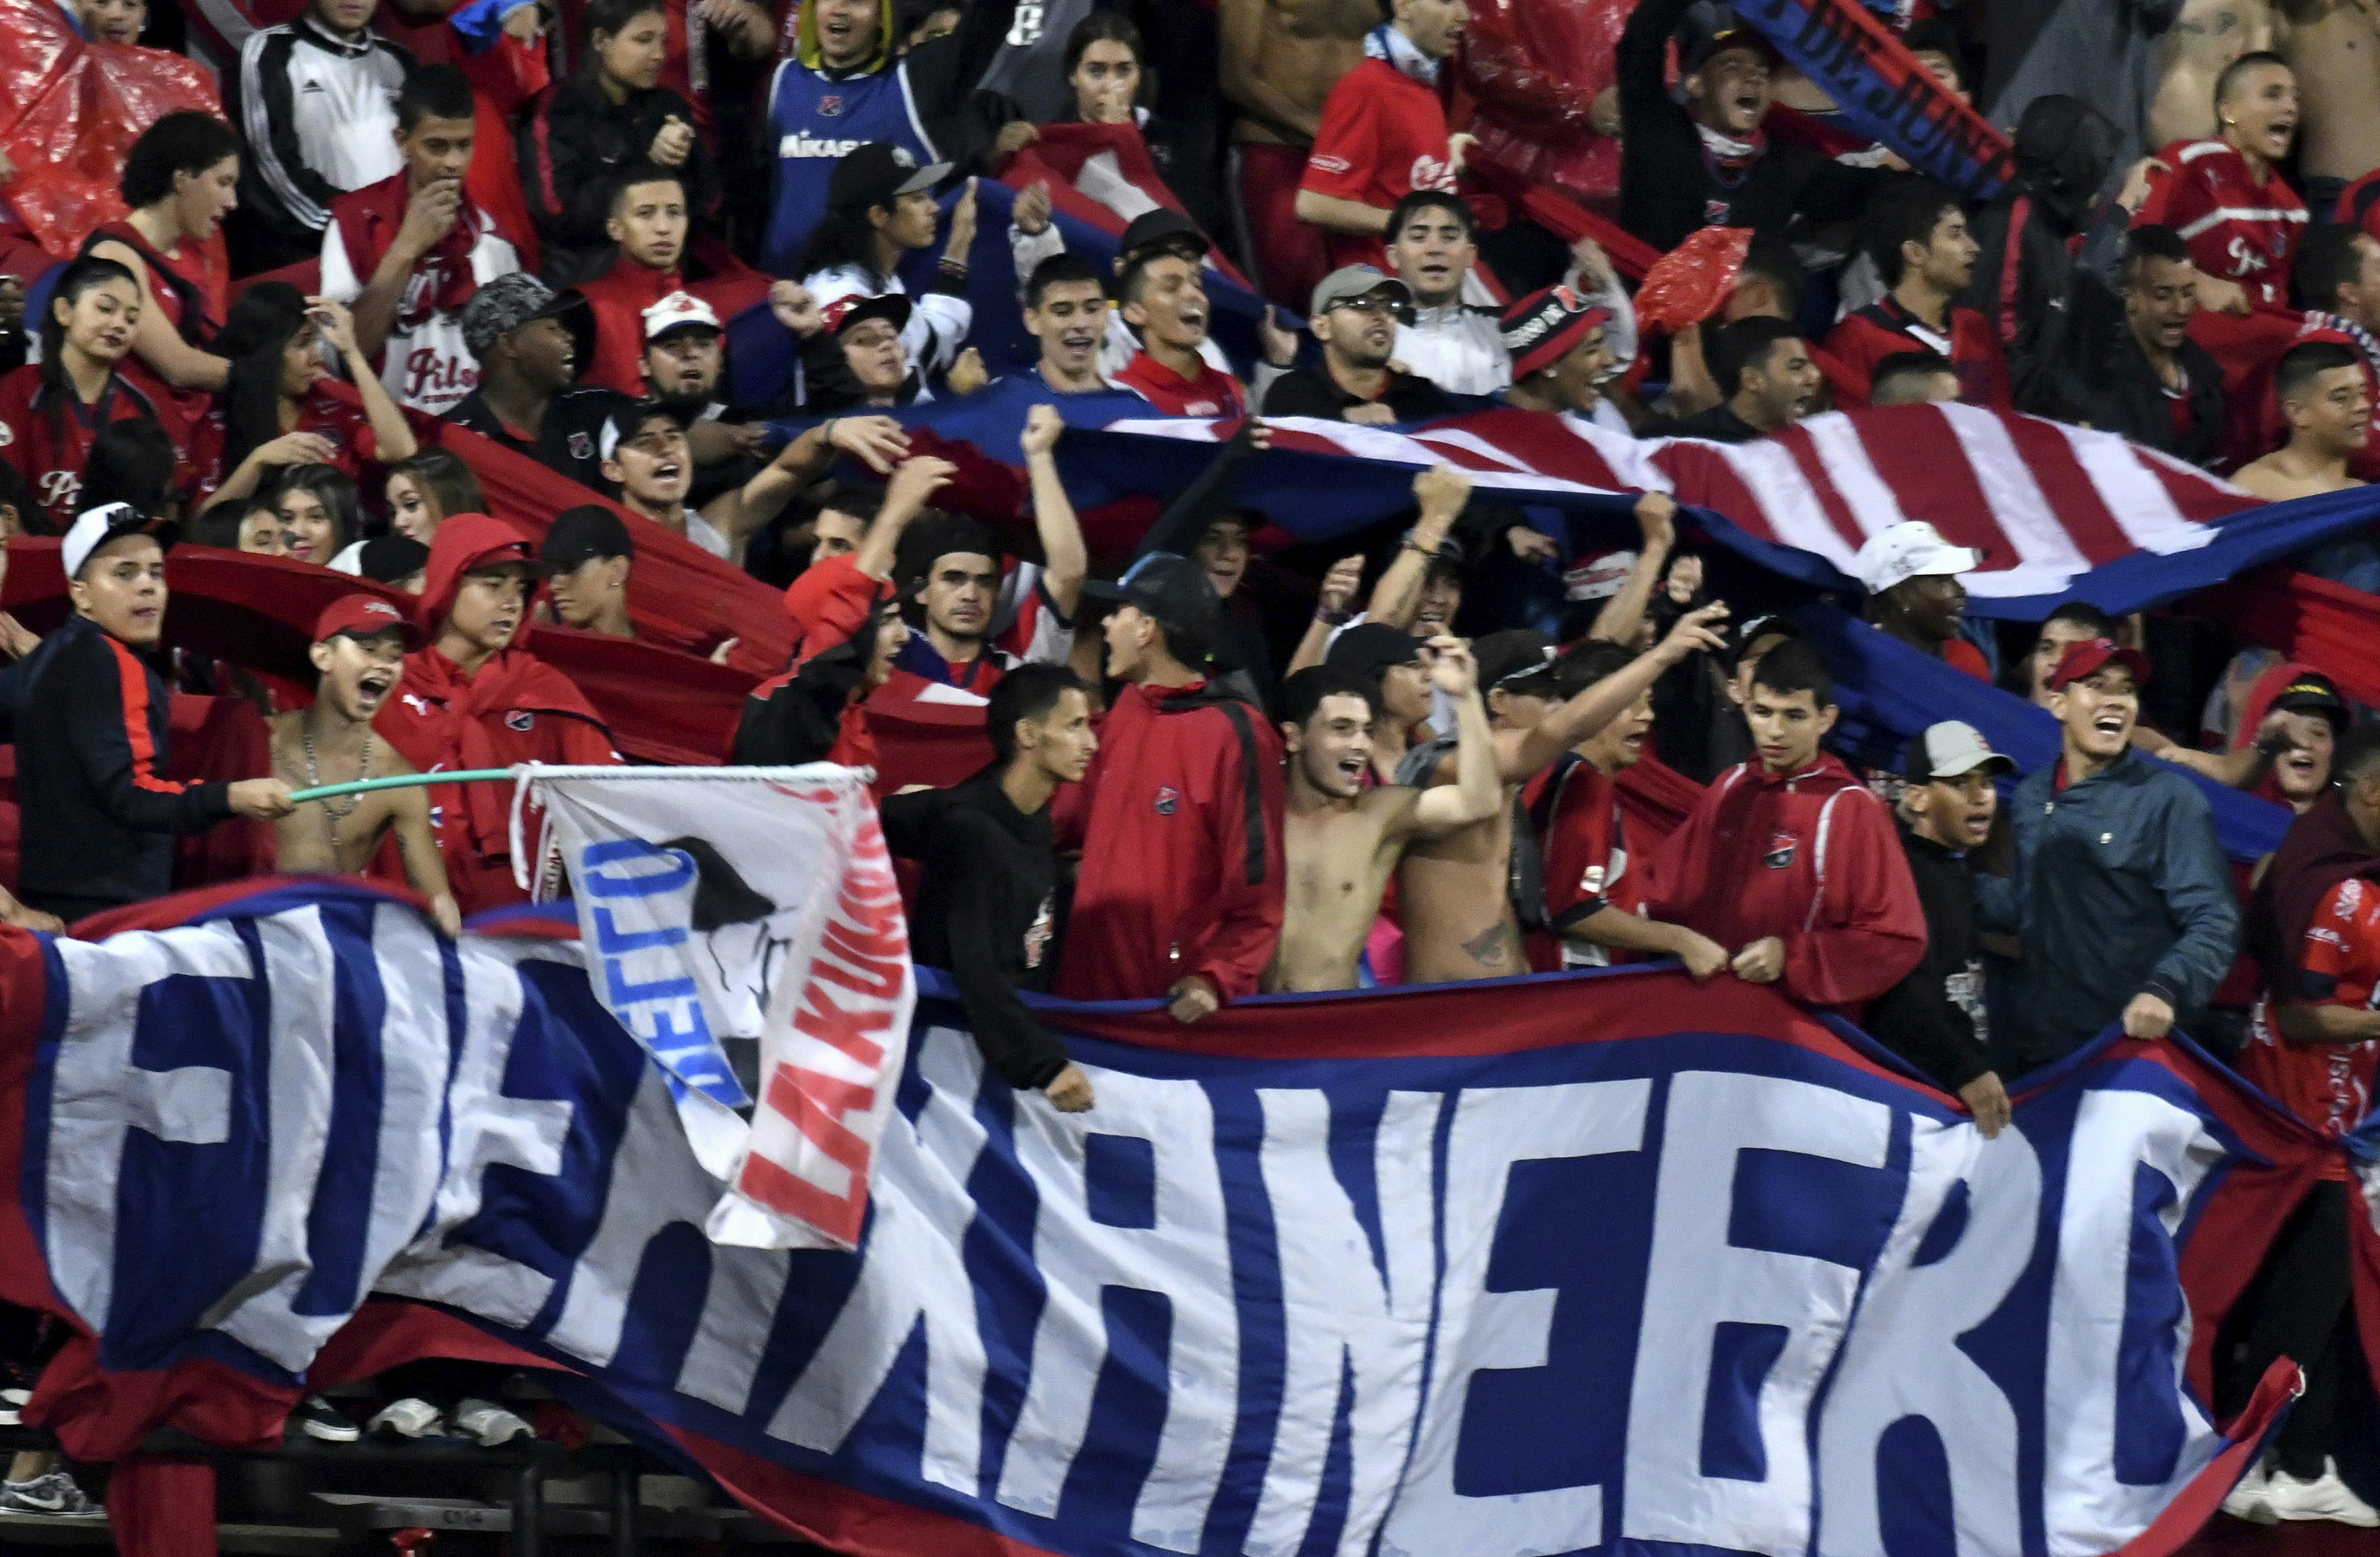 A group of Deportivo Independiente Medellín soccer fans some wearing red and black jerseys and others shirtless wave flags and hold up large banners during a soccer game in Colombia.